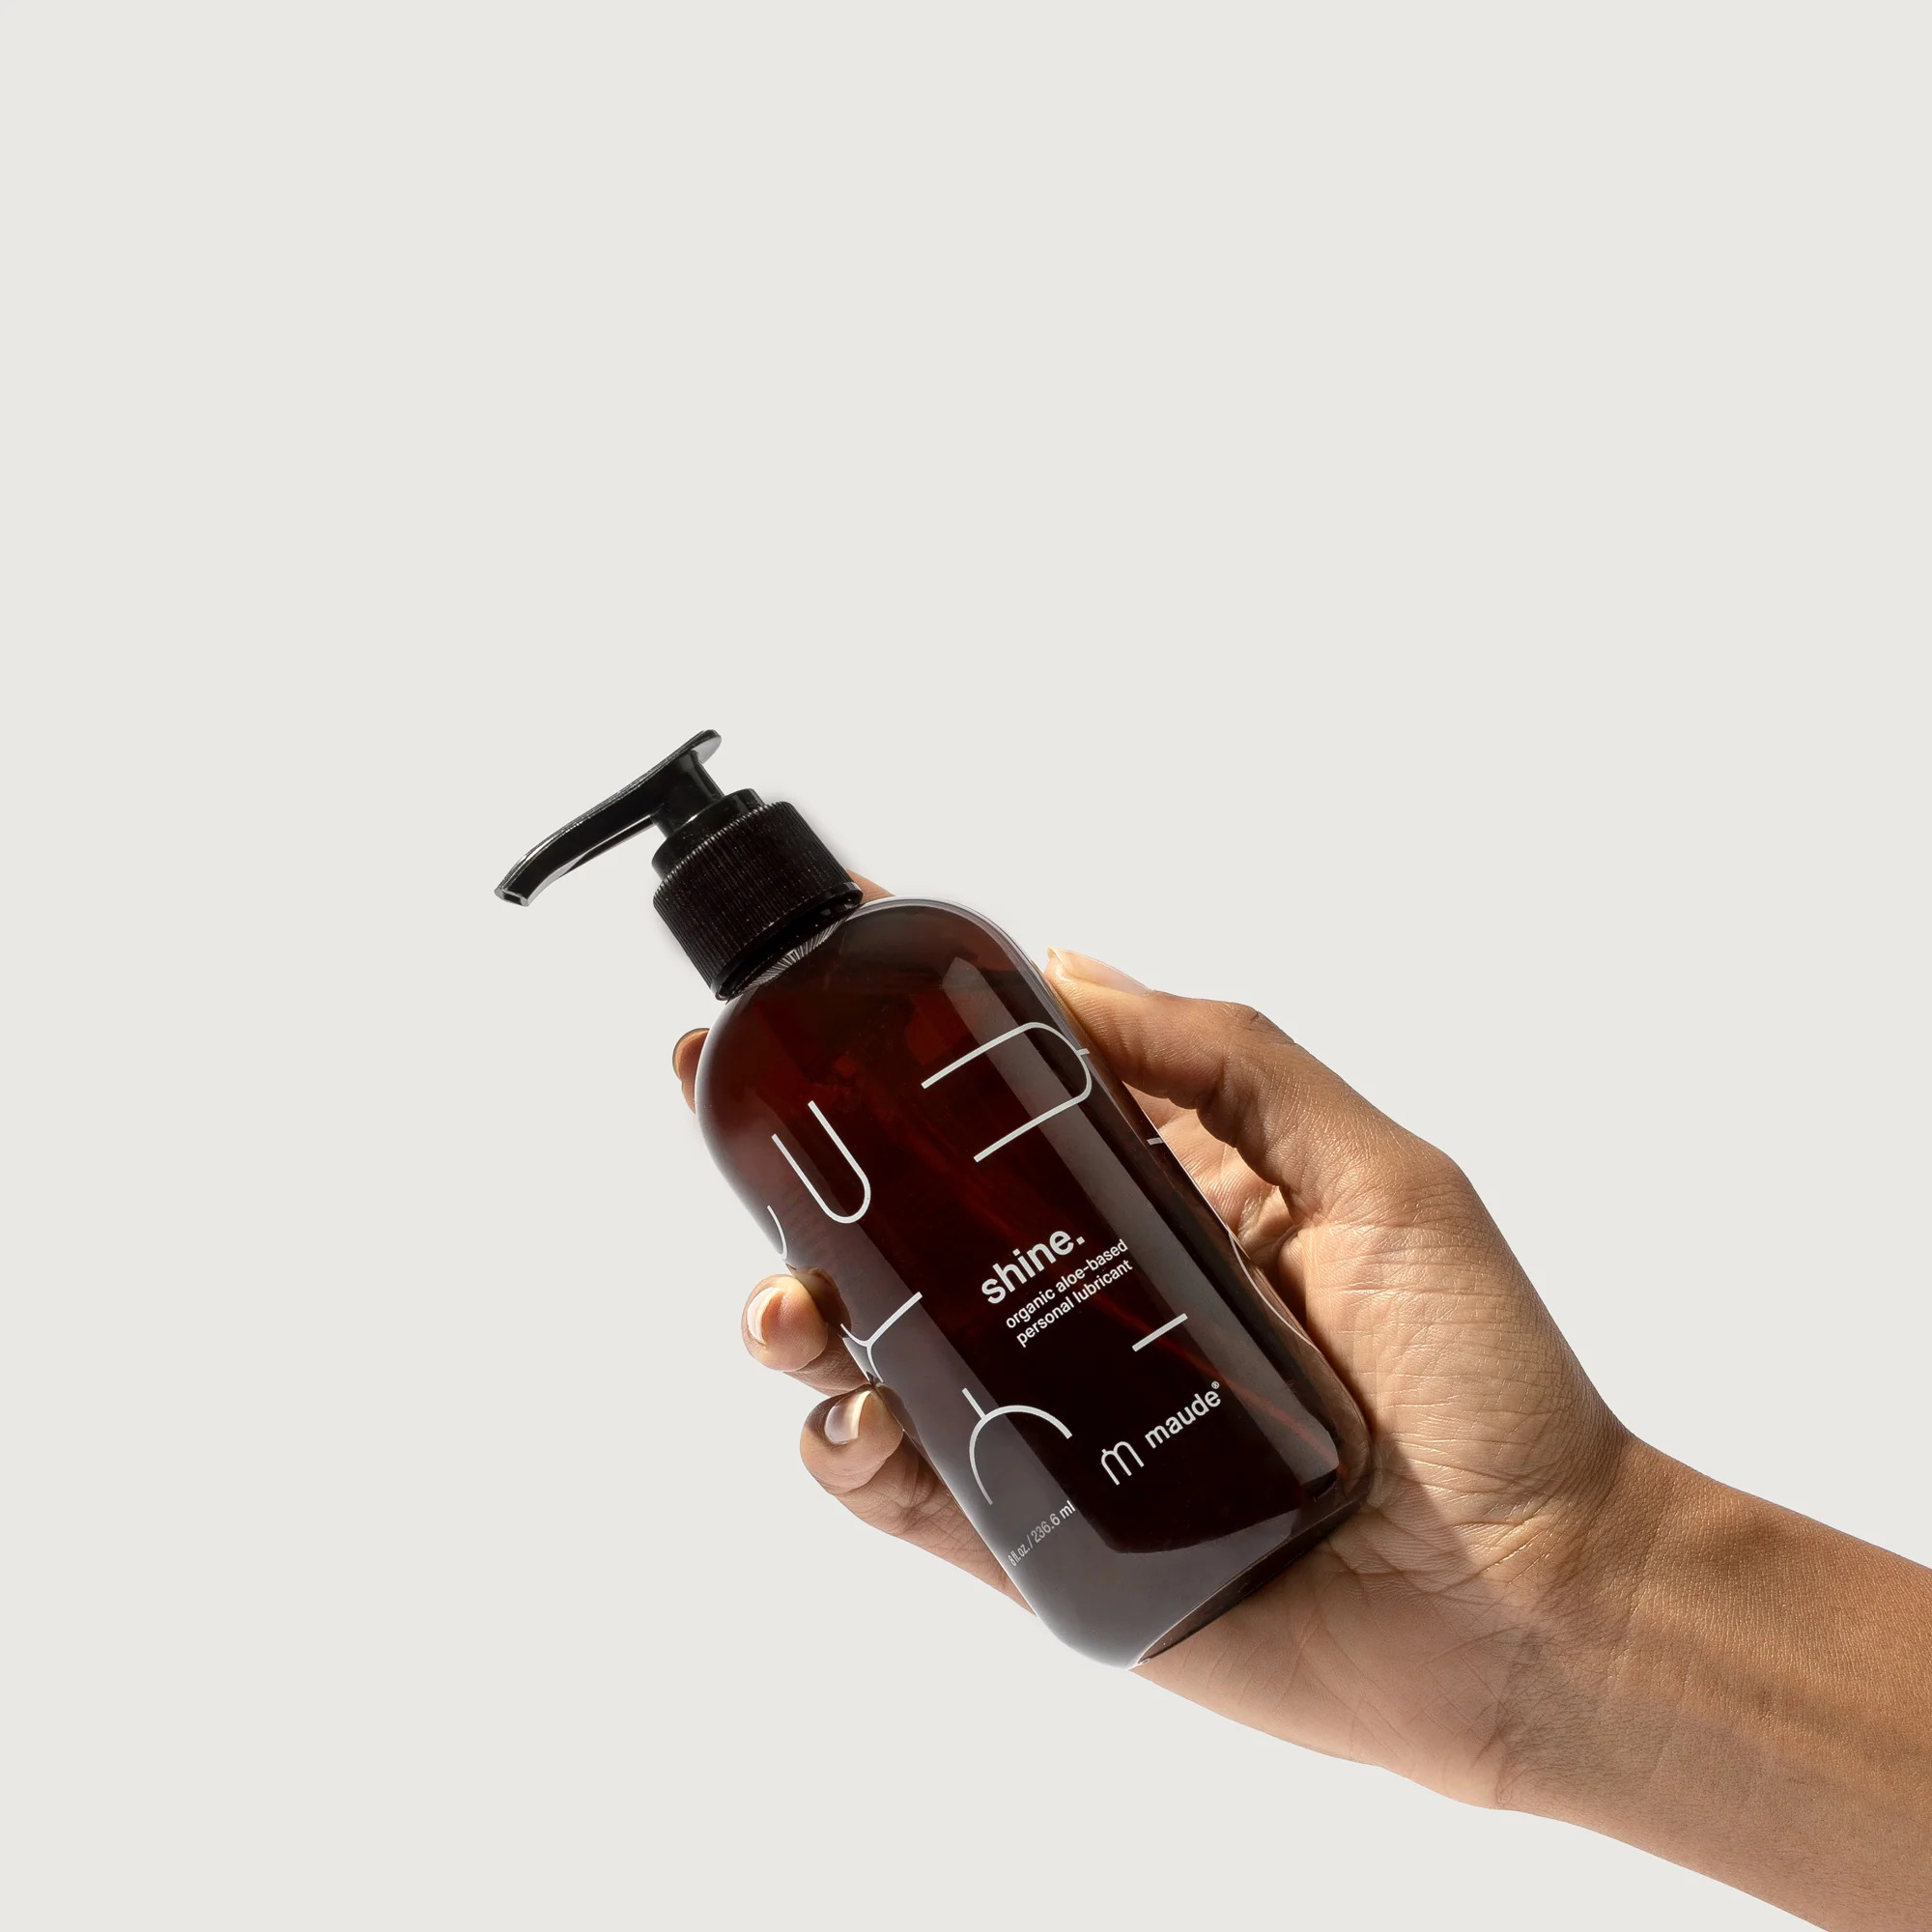 A hand holding Maude lubricant